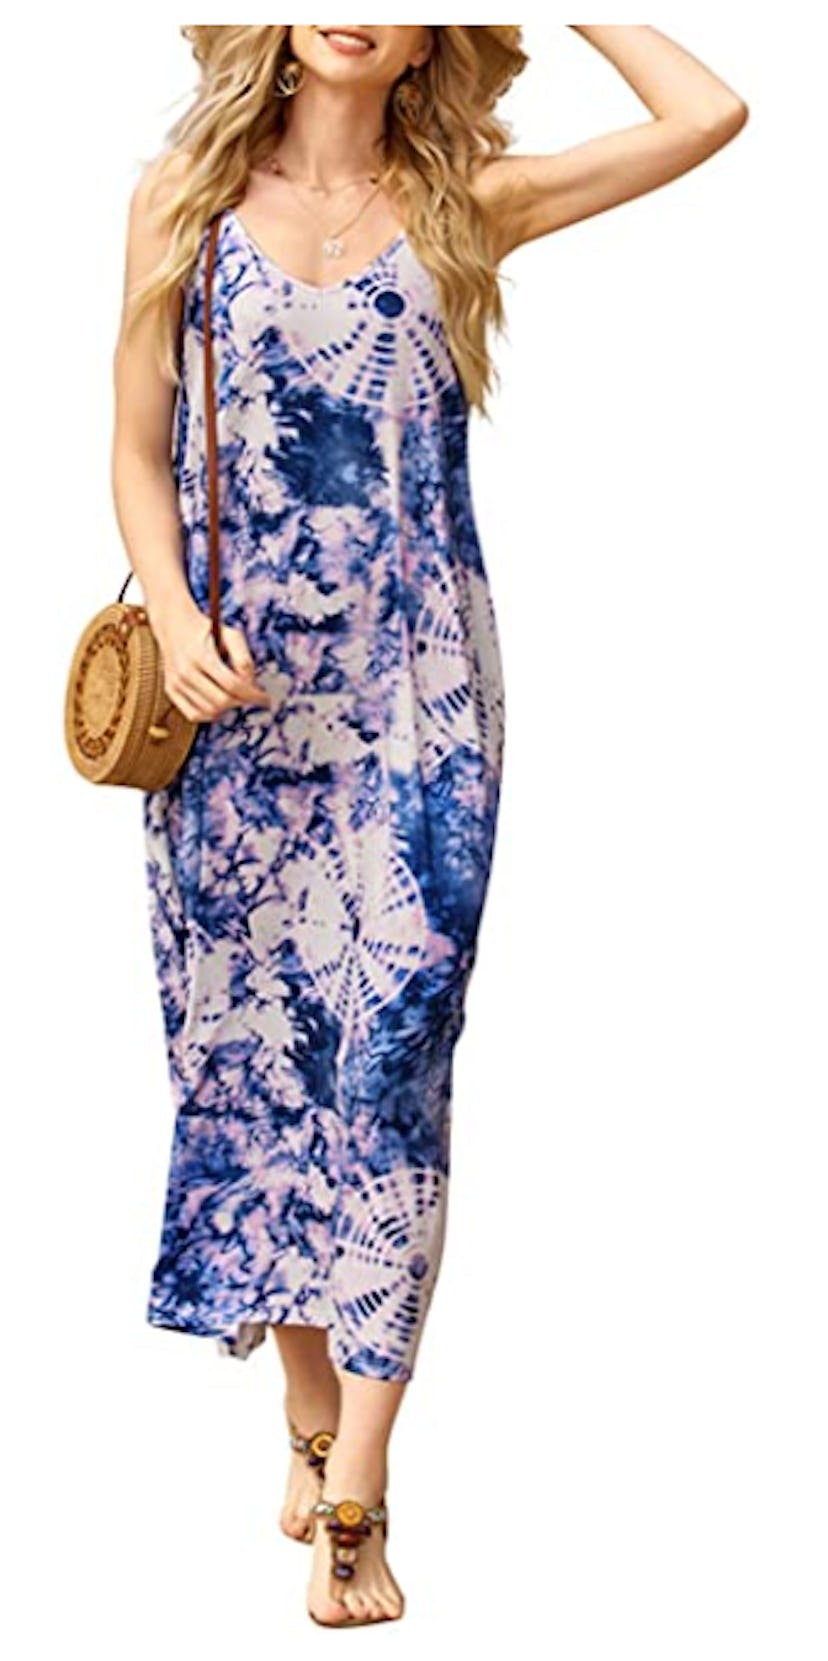 A strappy maxi sundress is casual enough for the beach but nice enough for a night out.